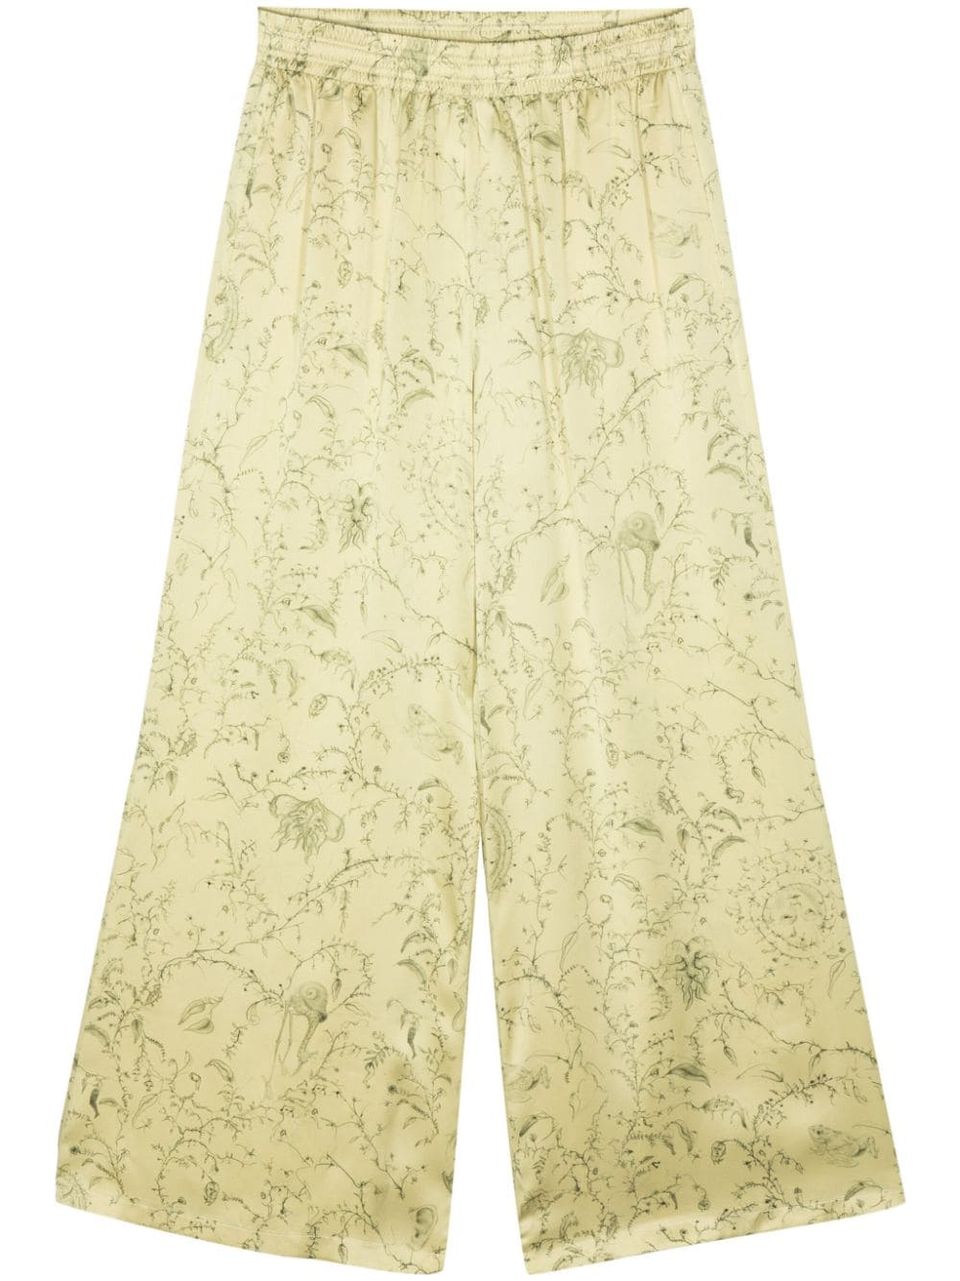 Graphic print trousers